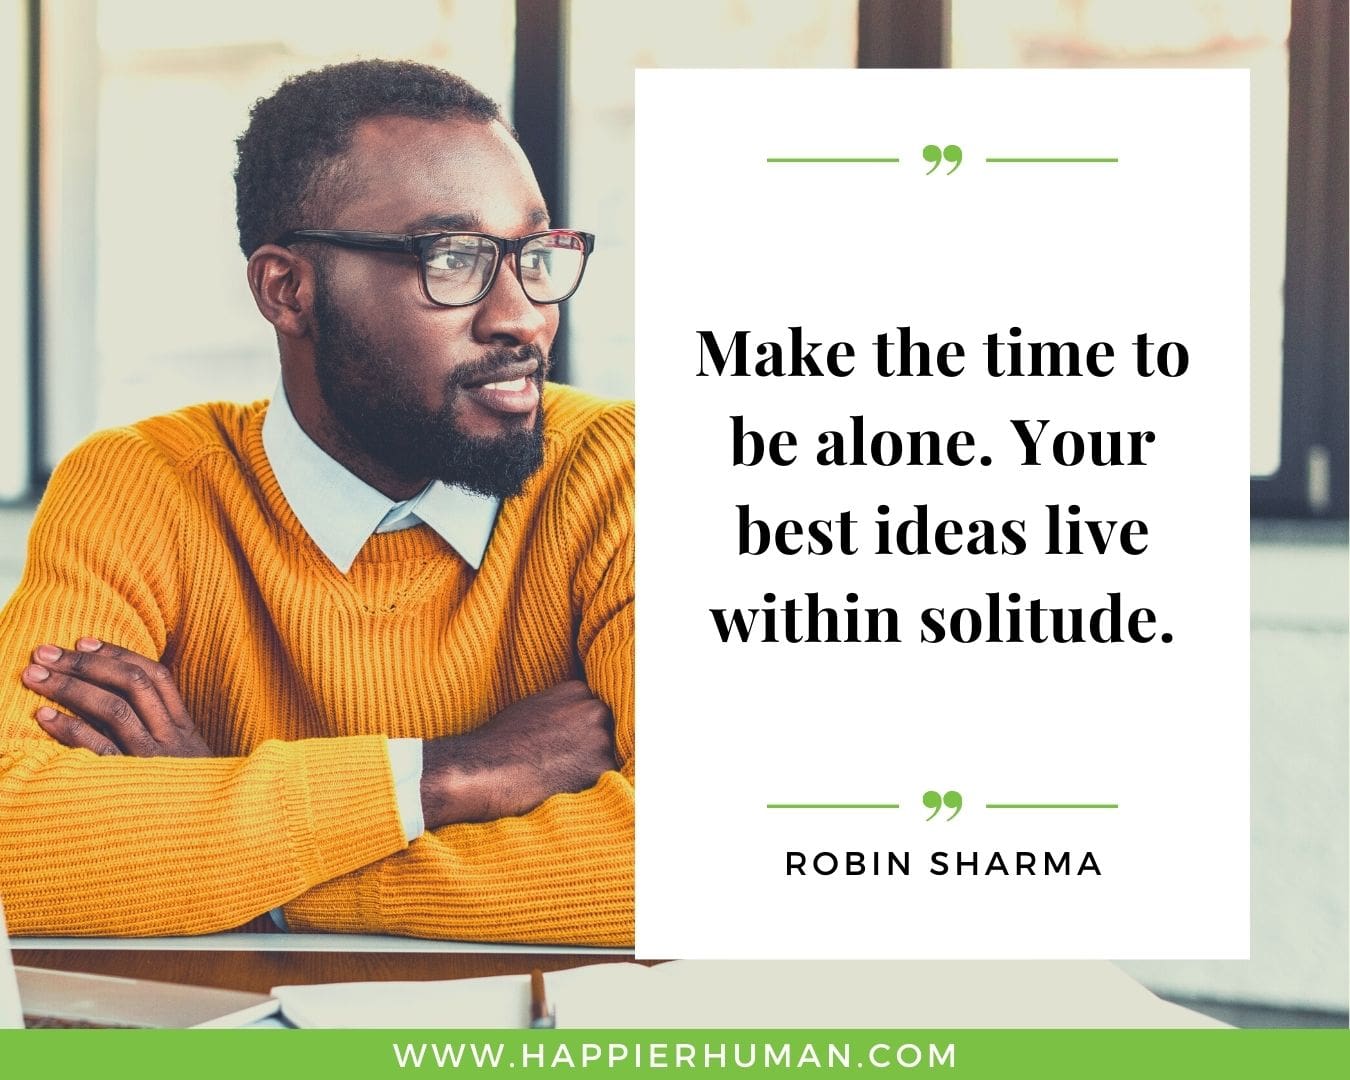 Loneliness Quotes - “Make the time to be alone. Your best ideas live within solitude.” – Robin Sharma